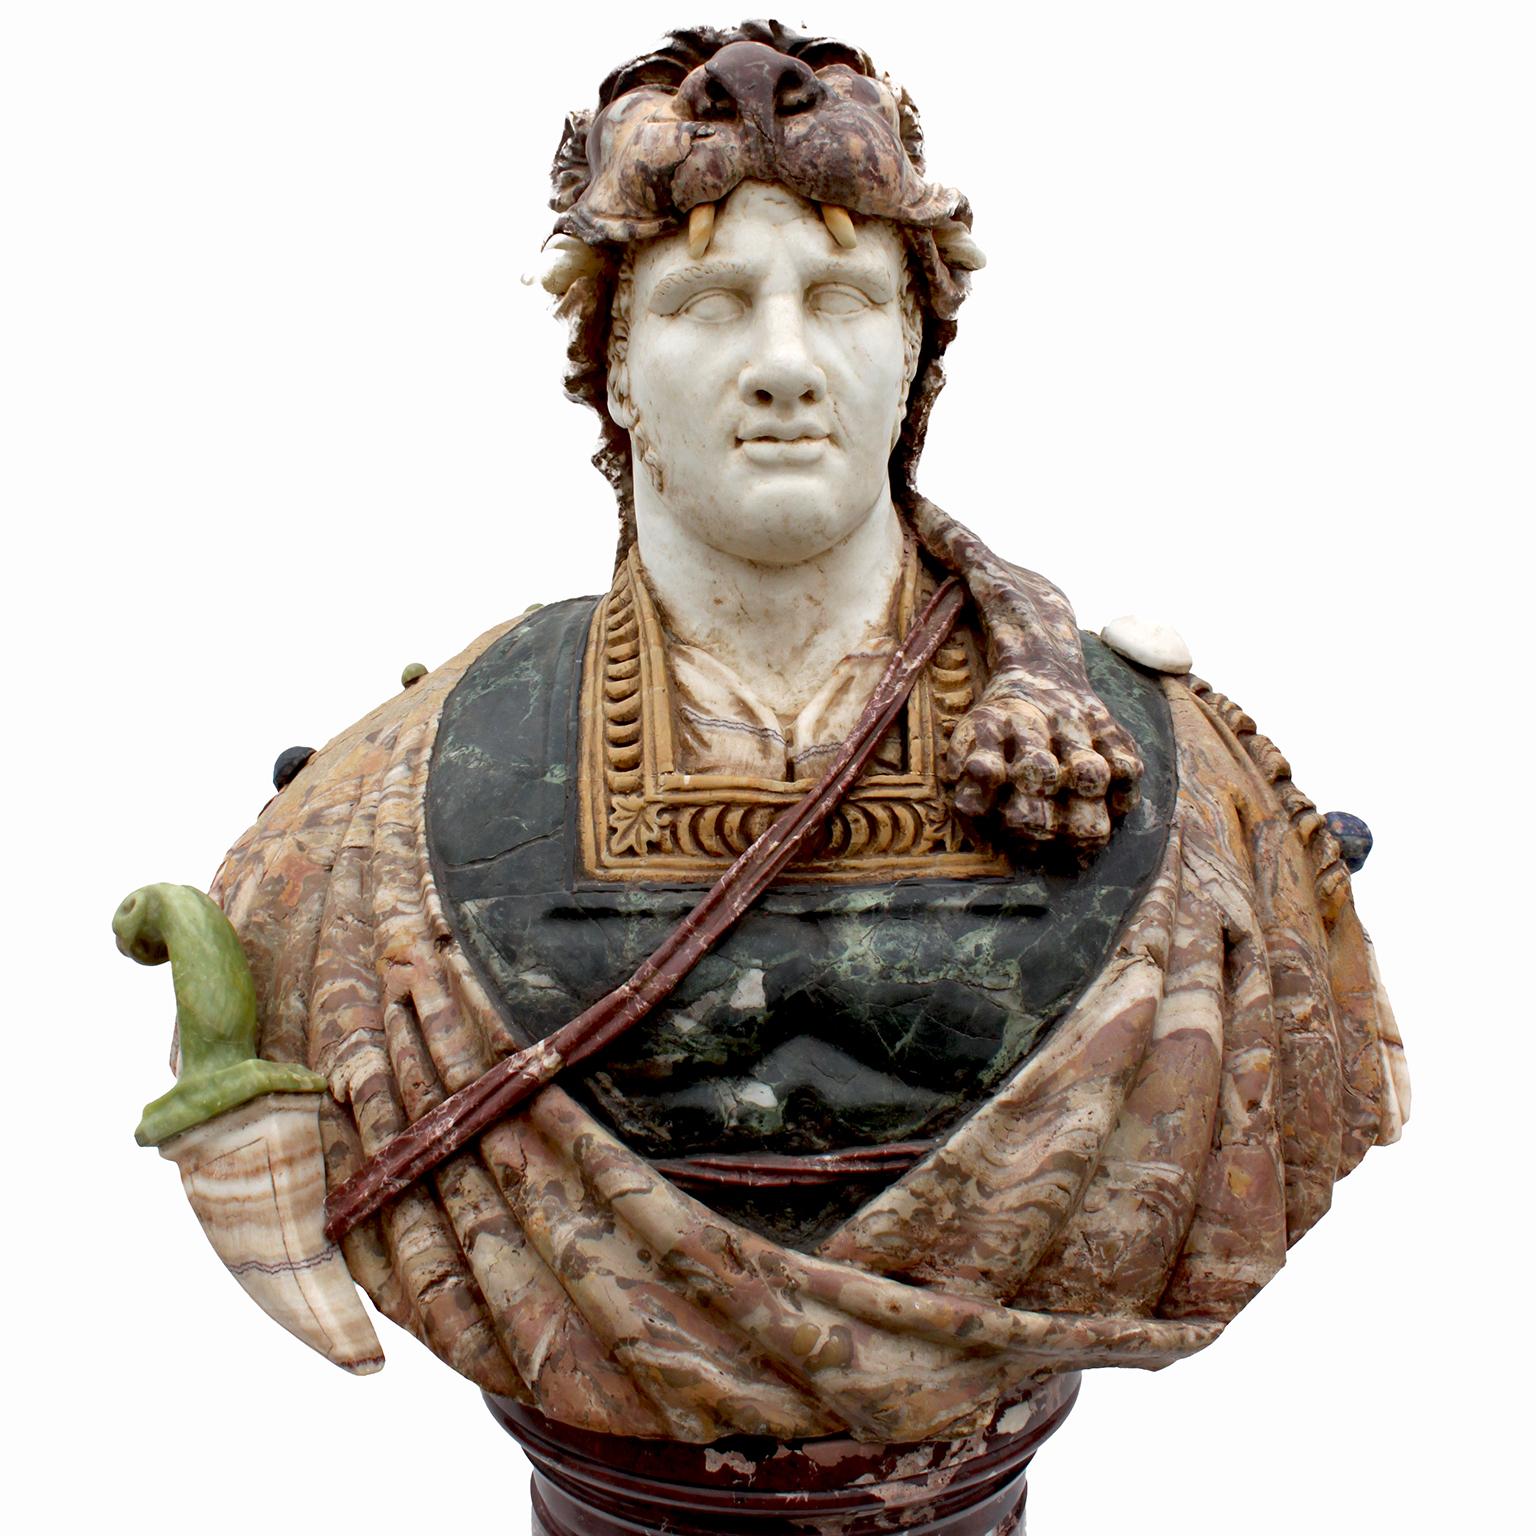 A very fine and mpressive life-size Italian, early 20th century marble bust of a Greco Roman Warrior, probably Hercules, after the antique. The large beautifully carved and decorated bust of a male warrior, depicted with an off-white marble head